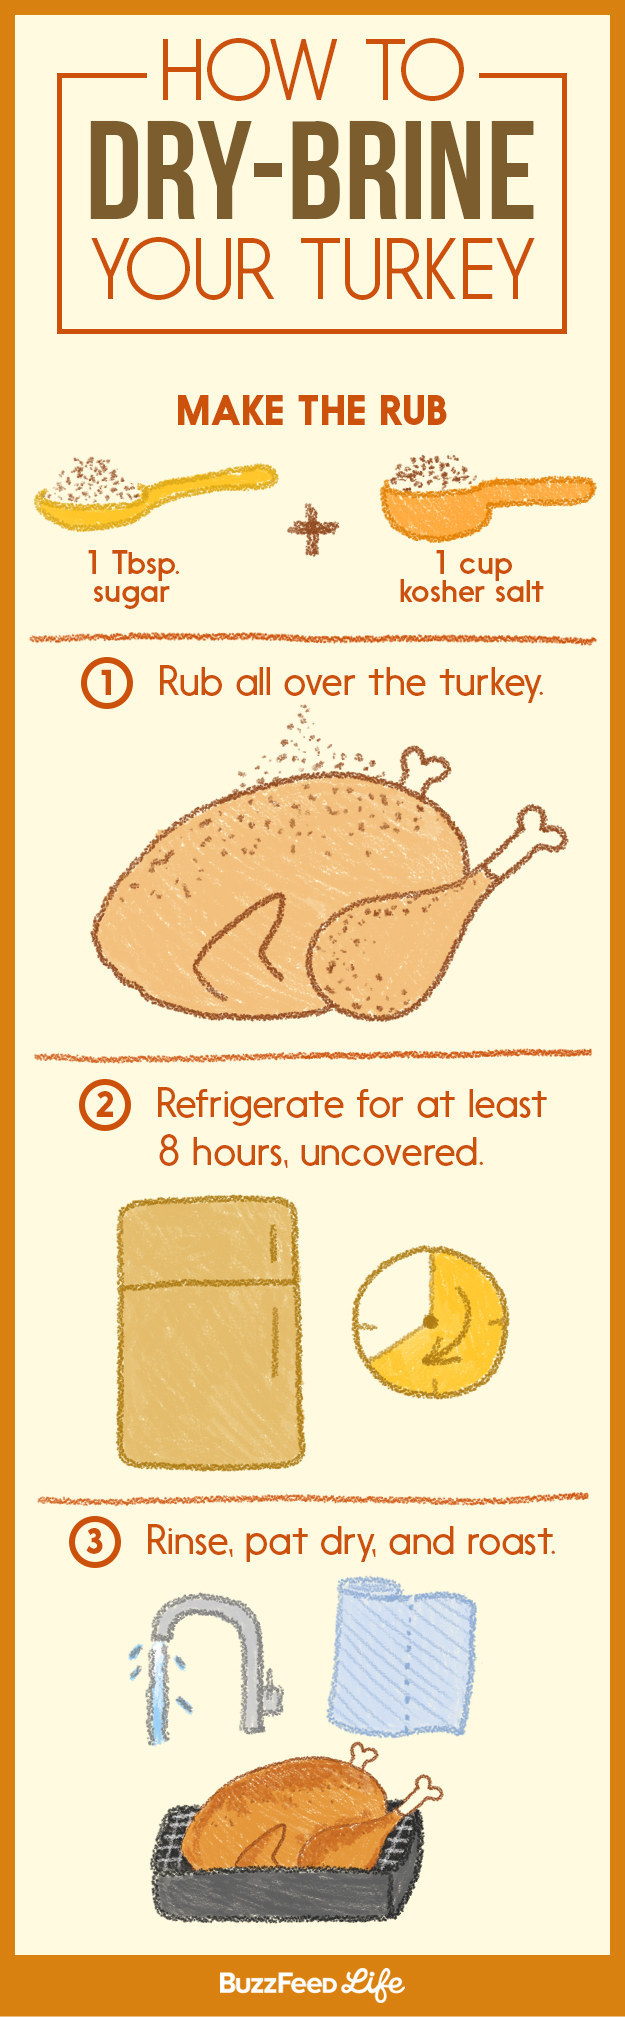 For prepping a turkey: